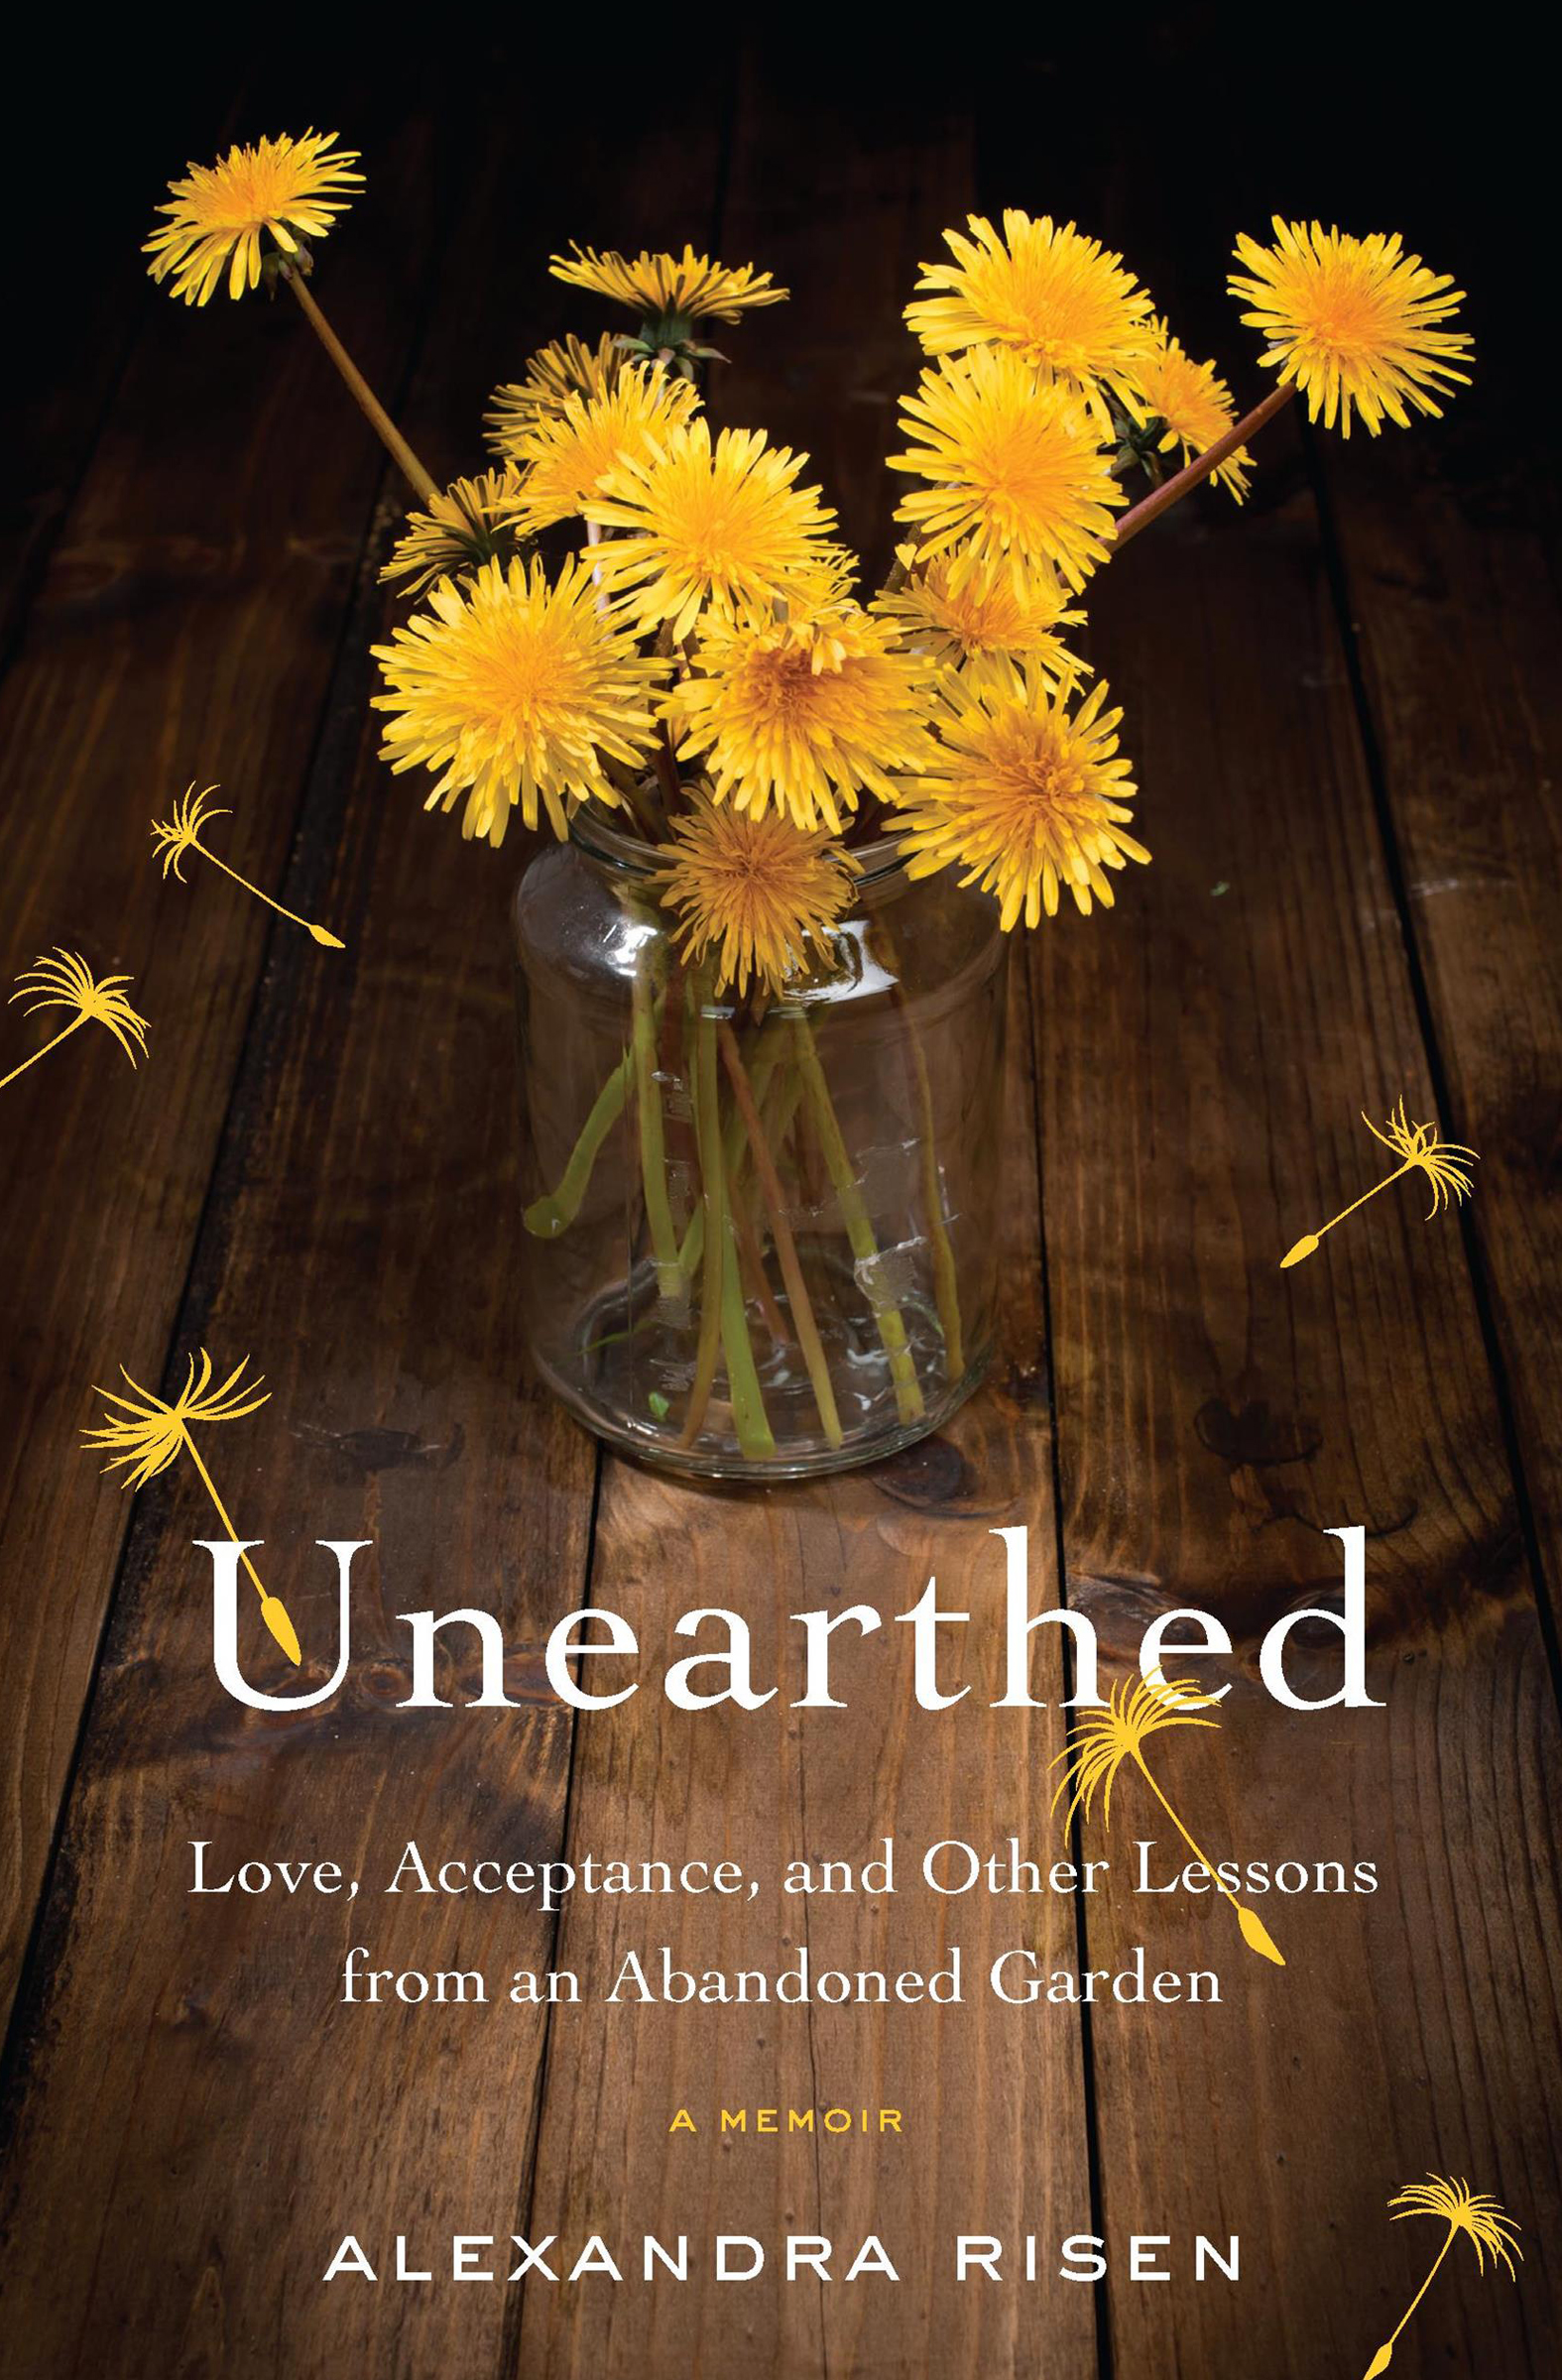 Umschlagbild für Unearthed [electronic resource] : Love, Acceptance, and Other Lessons from an Abandoned Garden